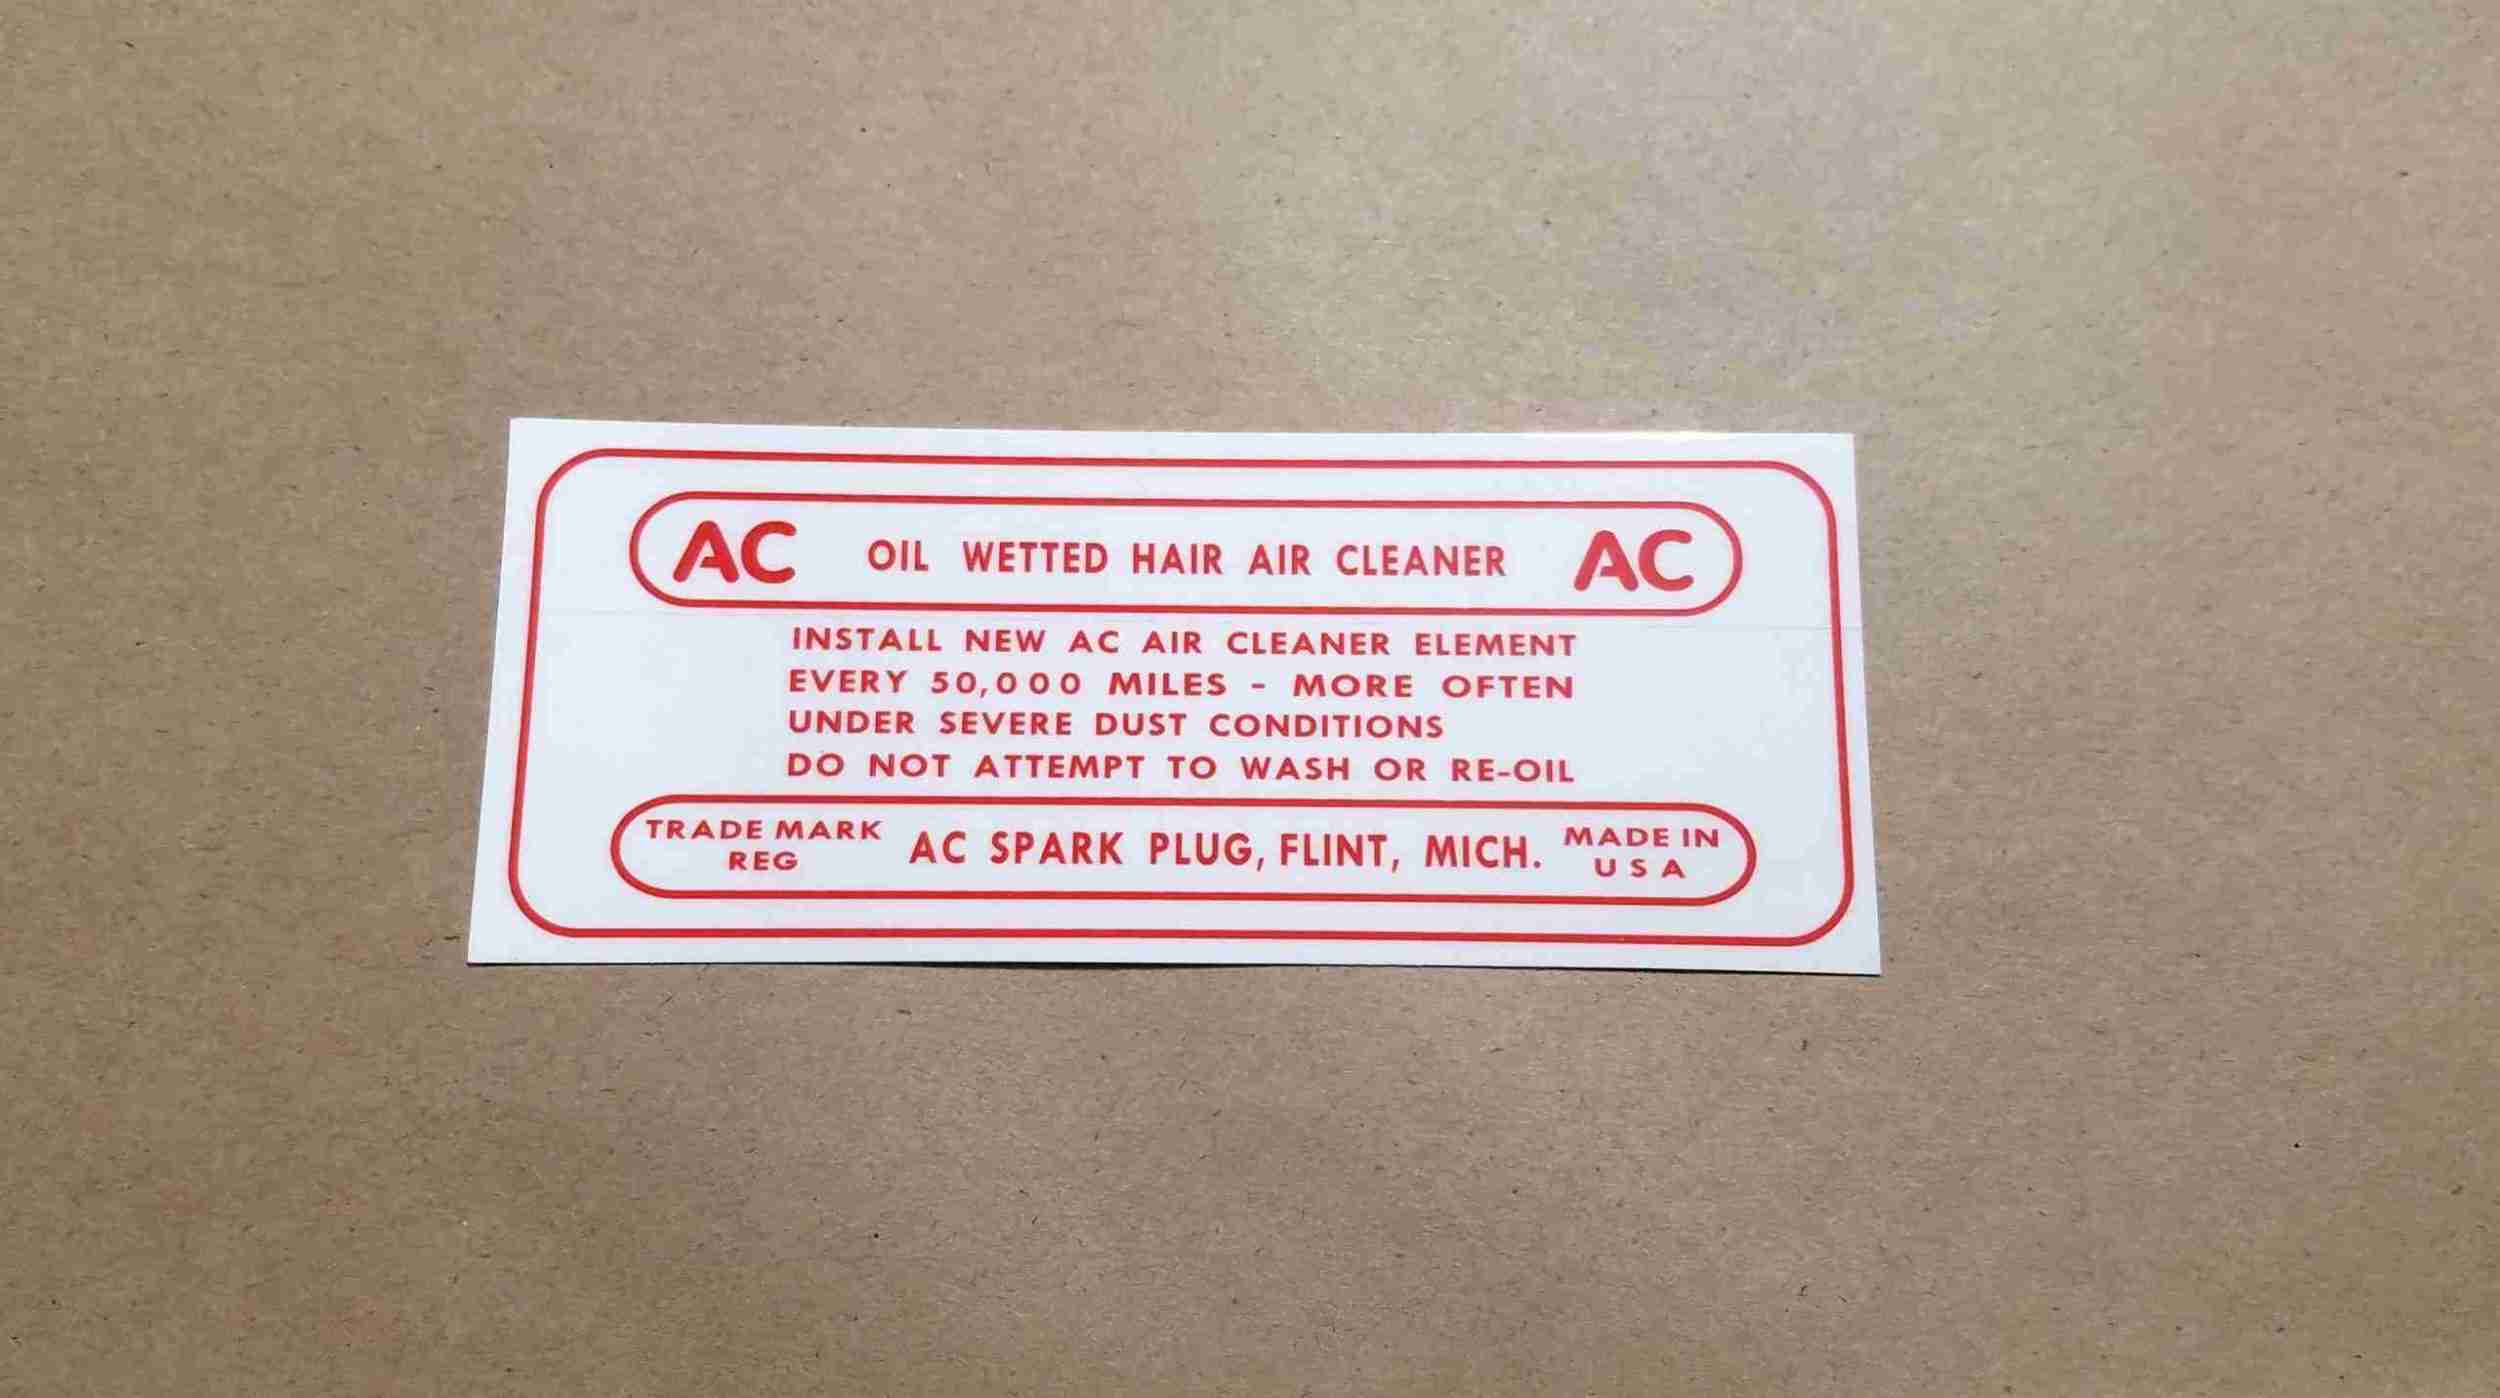 1957 Fuel Injection Orange Oil Bath Air Cleaner Service Instruction Decal, rectangular